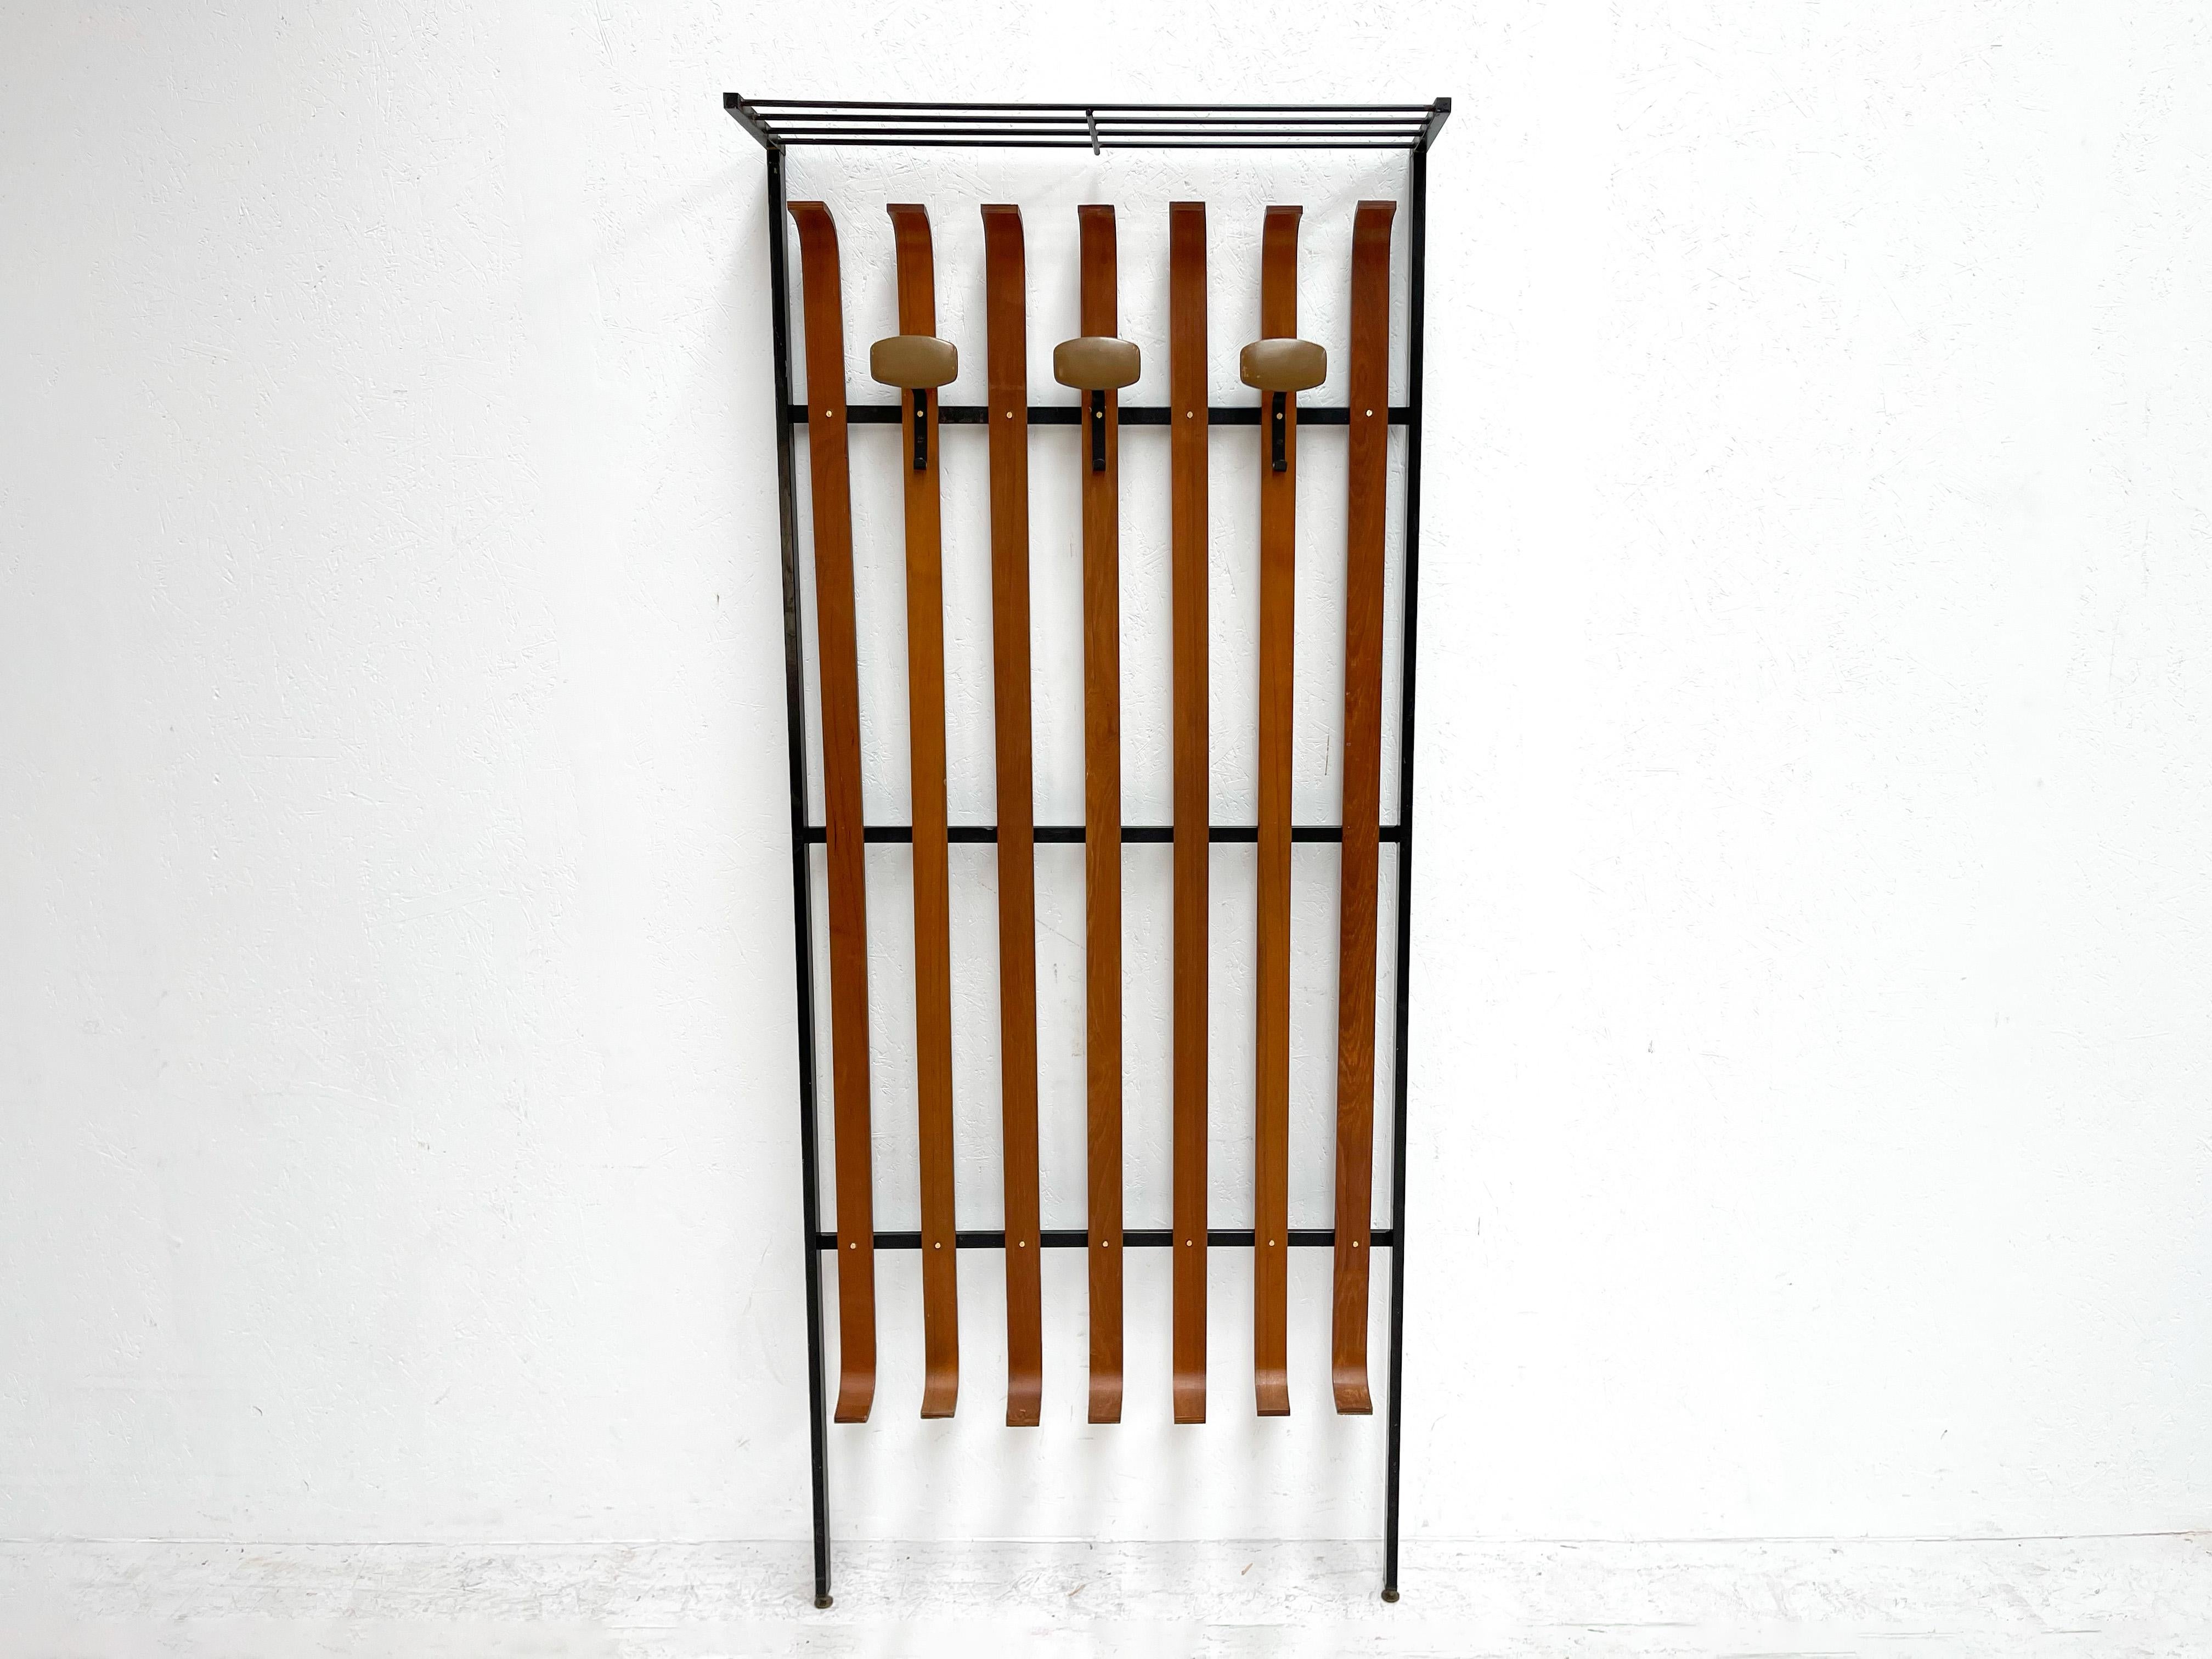 Beautiful Italian coat rack
An elegant and lovely Italian coat rack.
The coat rack features a wood frame with beautiful leather hangers.
 
This coatrack can be put on the ground and fixed to the wall.
 
The coat rack is in good condition with